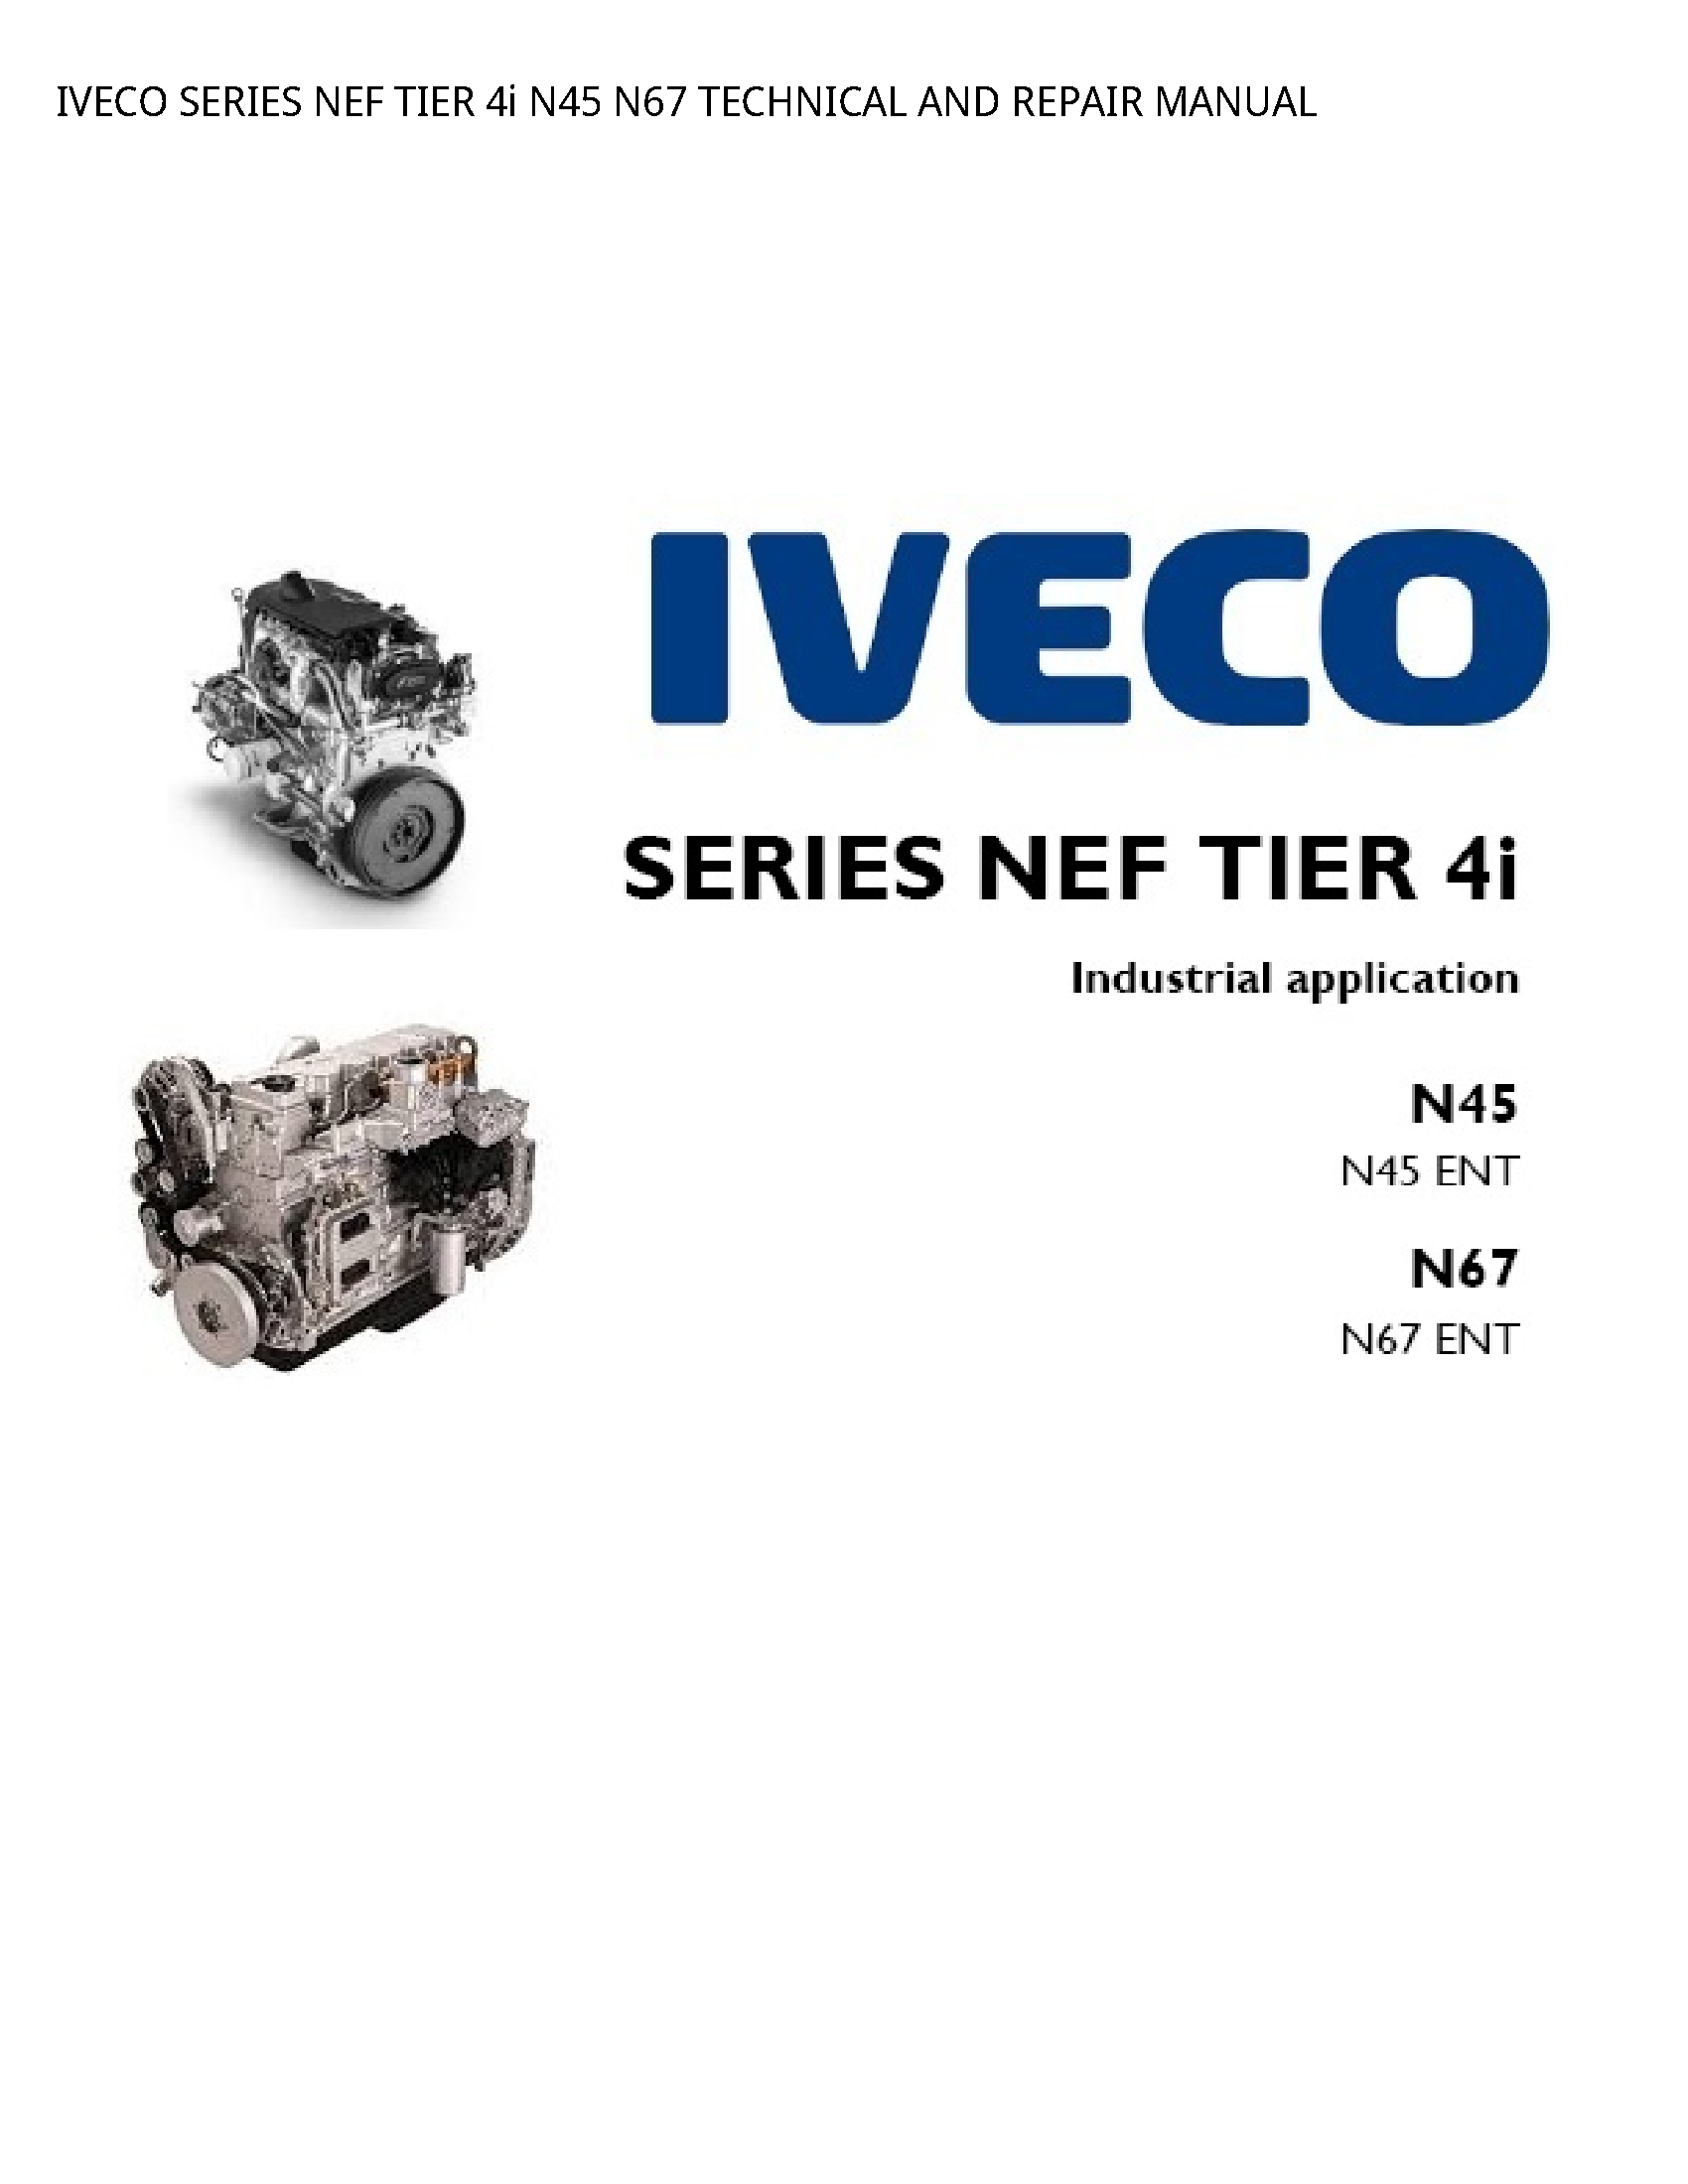 Iveco 4i SERIES NEF TIER TECHNICAL AND REPAIR manual